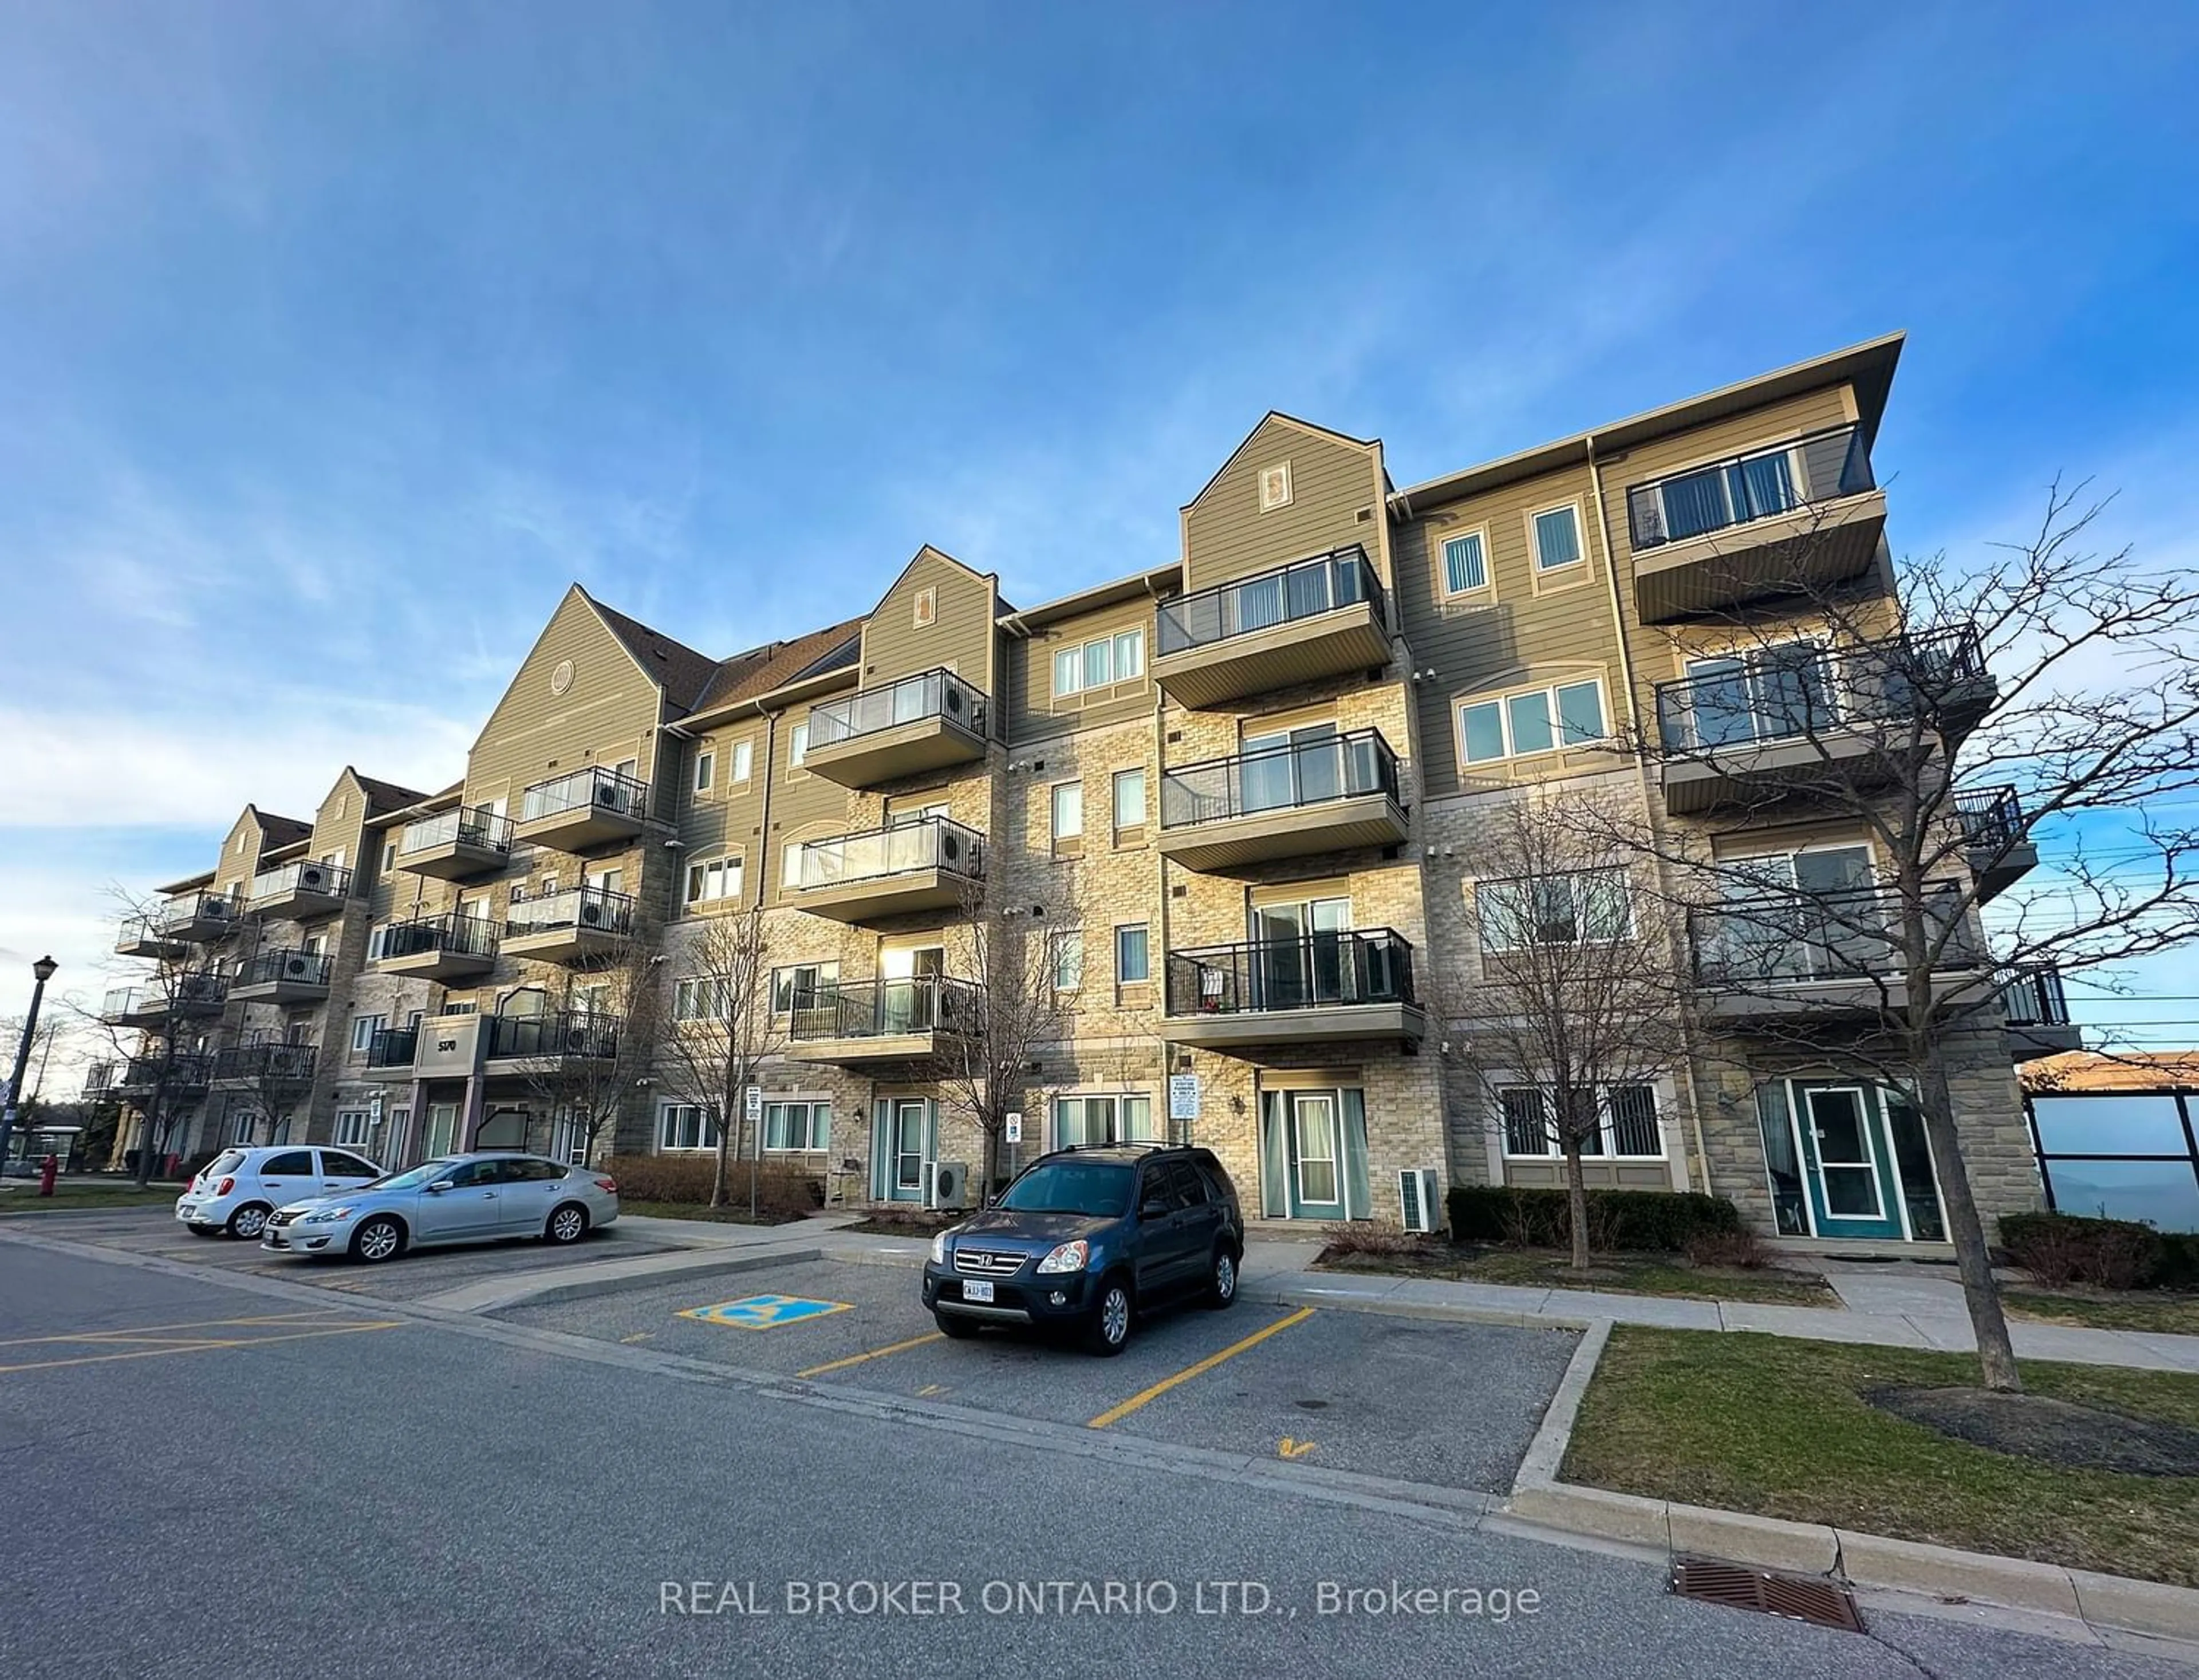 A pic from exterior of the house or condo for 5170 Winston Churchill Blvd #405, Mississauga Ontario L5M 0P2